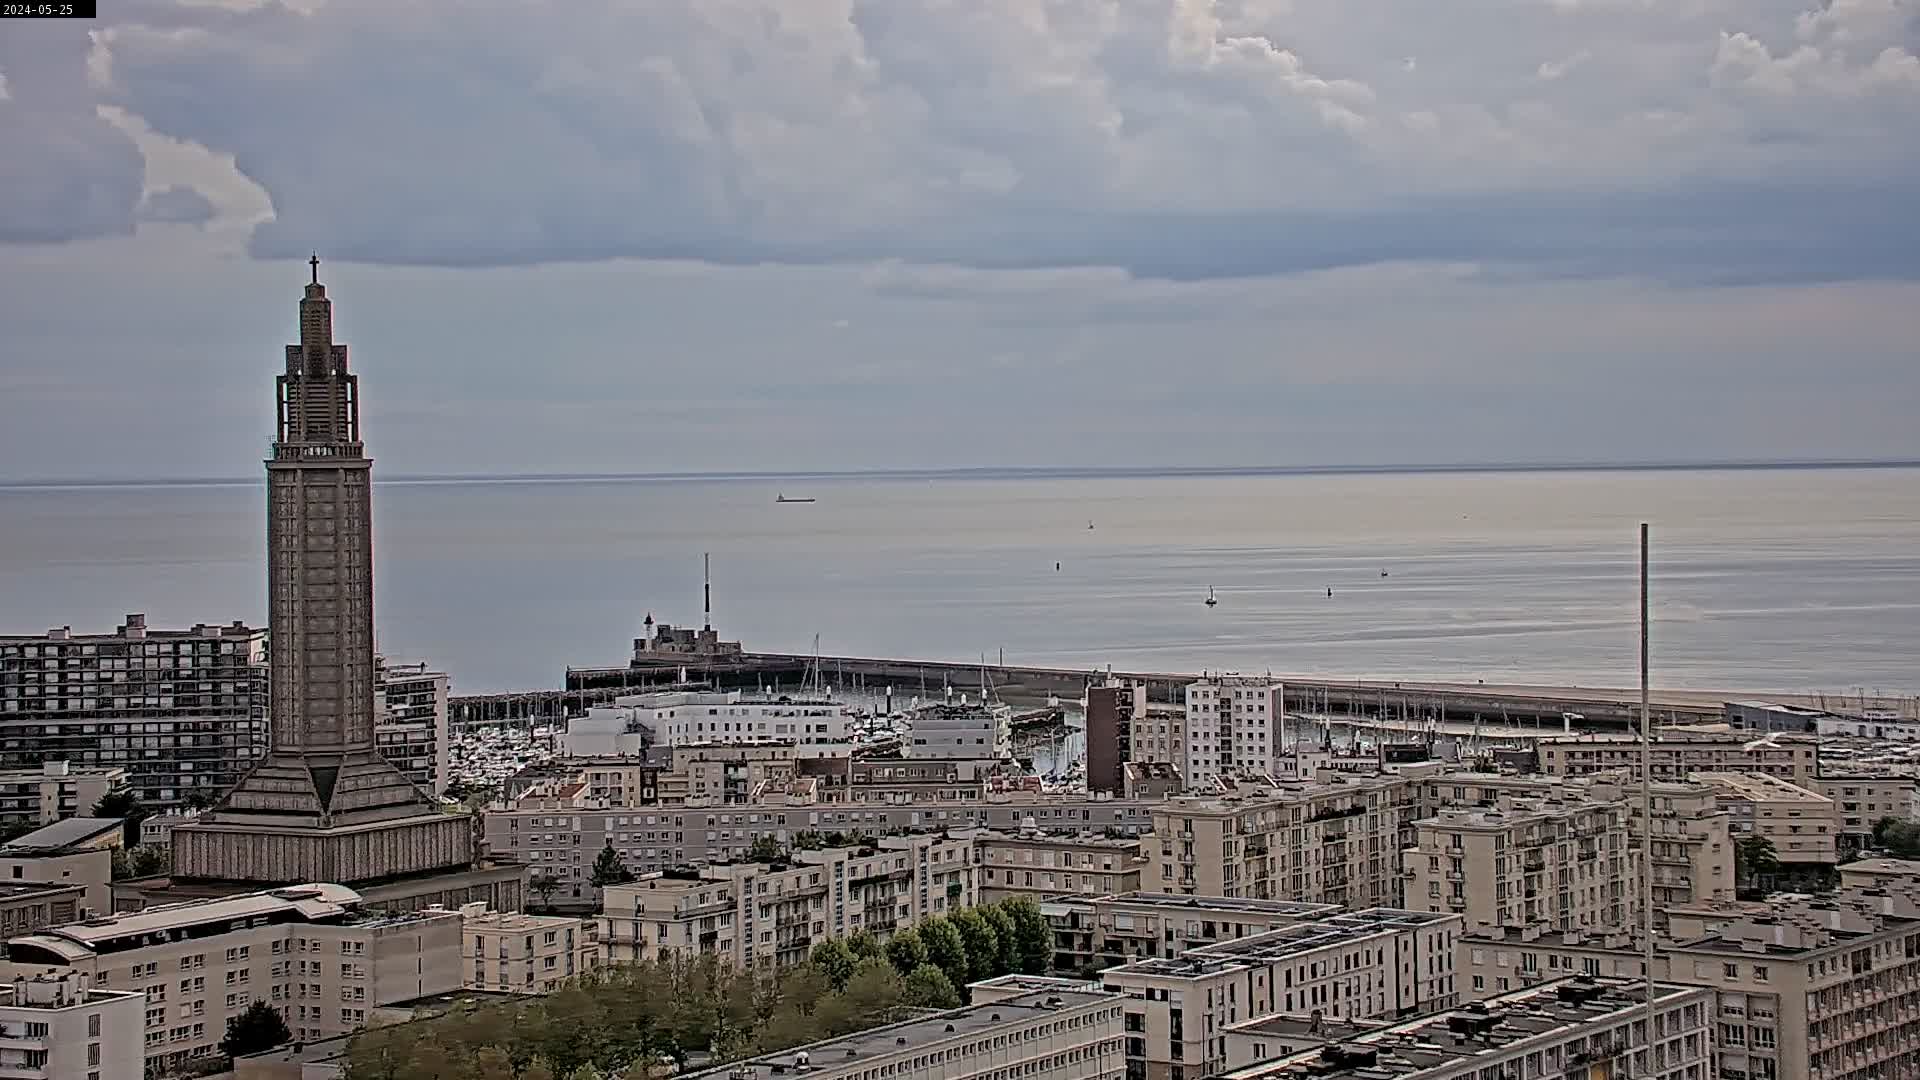 Le Havre Gio. 18:10